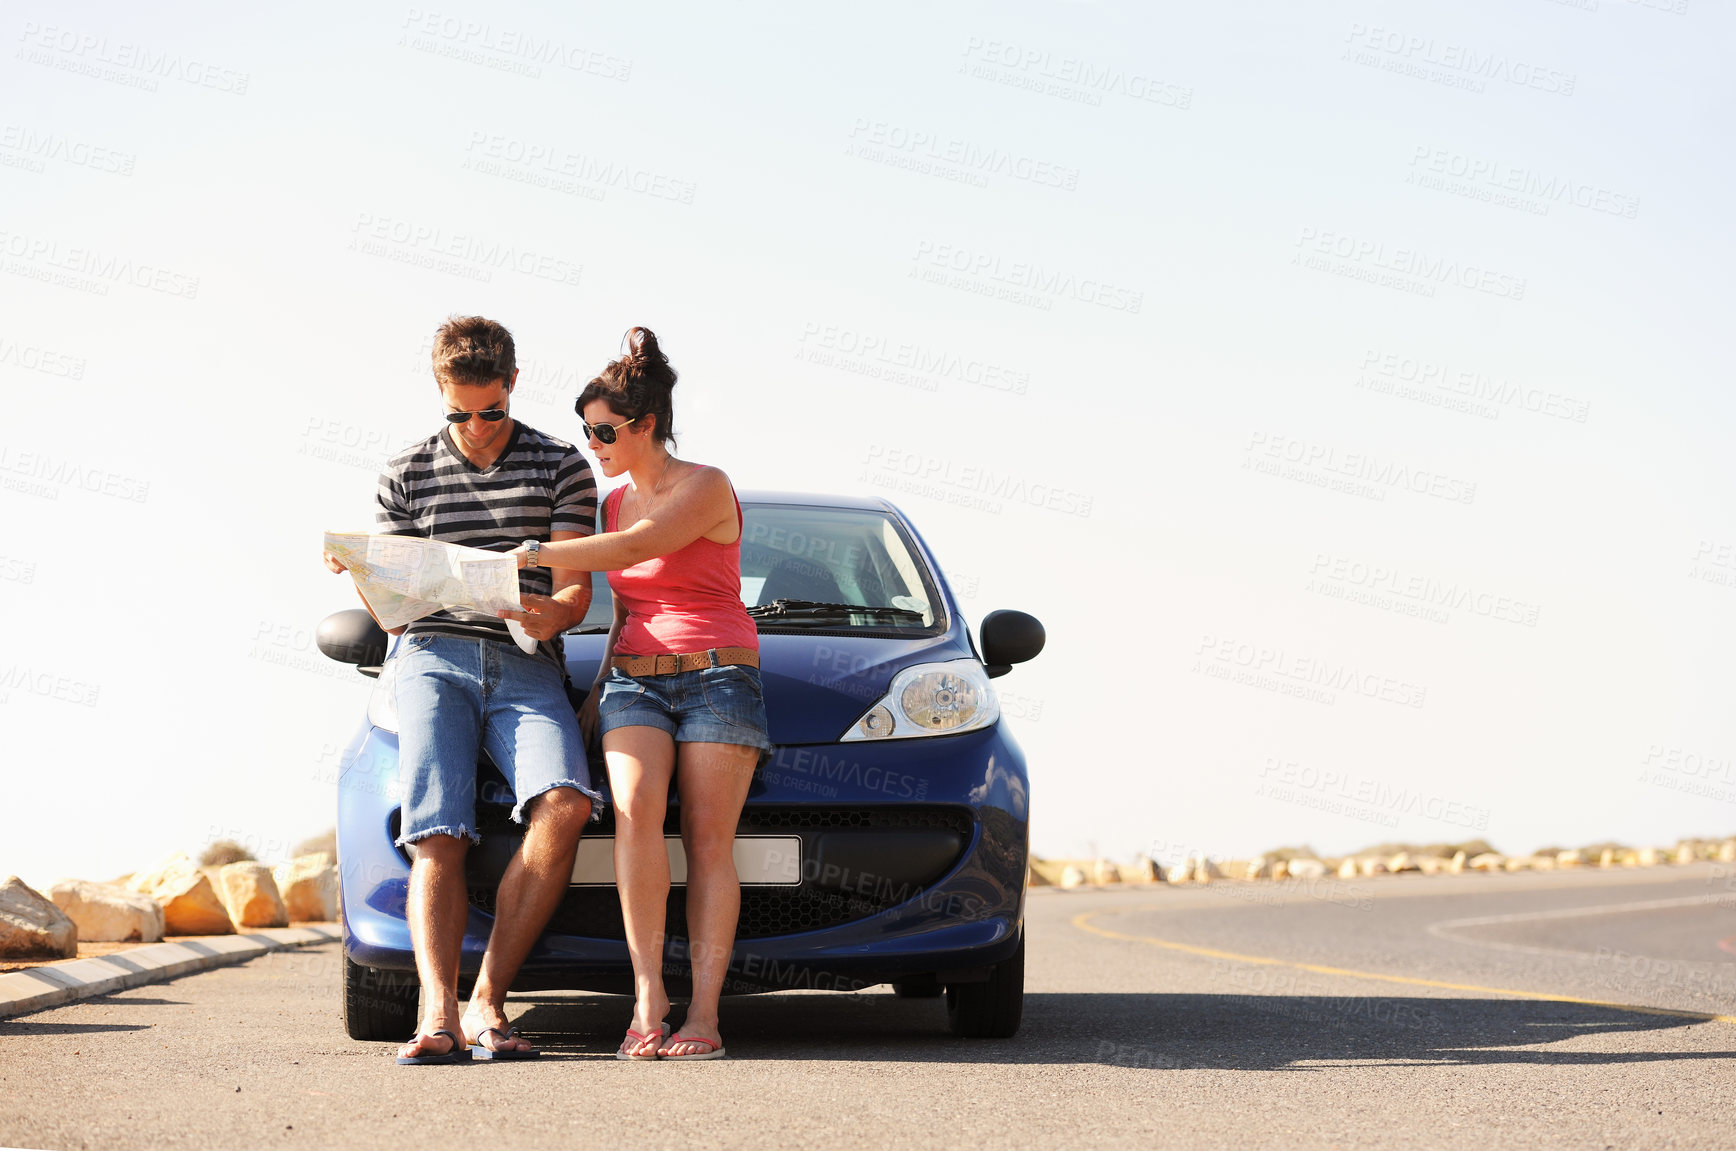 Buy stock photo A man and a woman parked on the side of the road and reading a map together while seated on the bonnet of their car